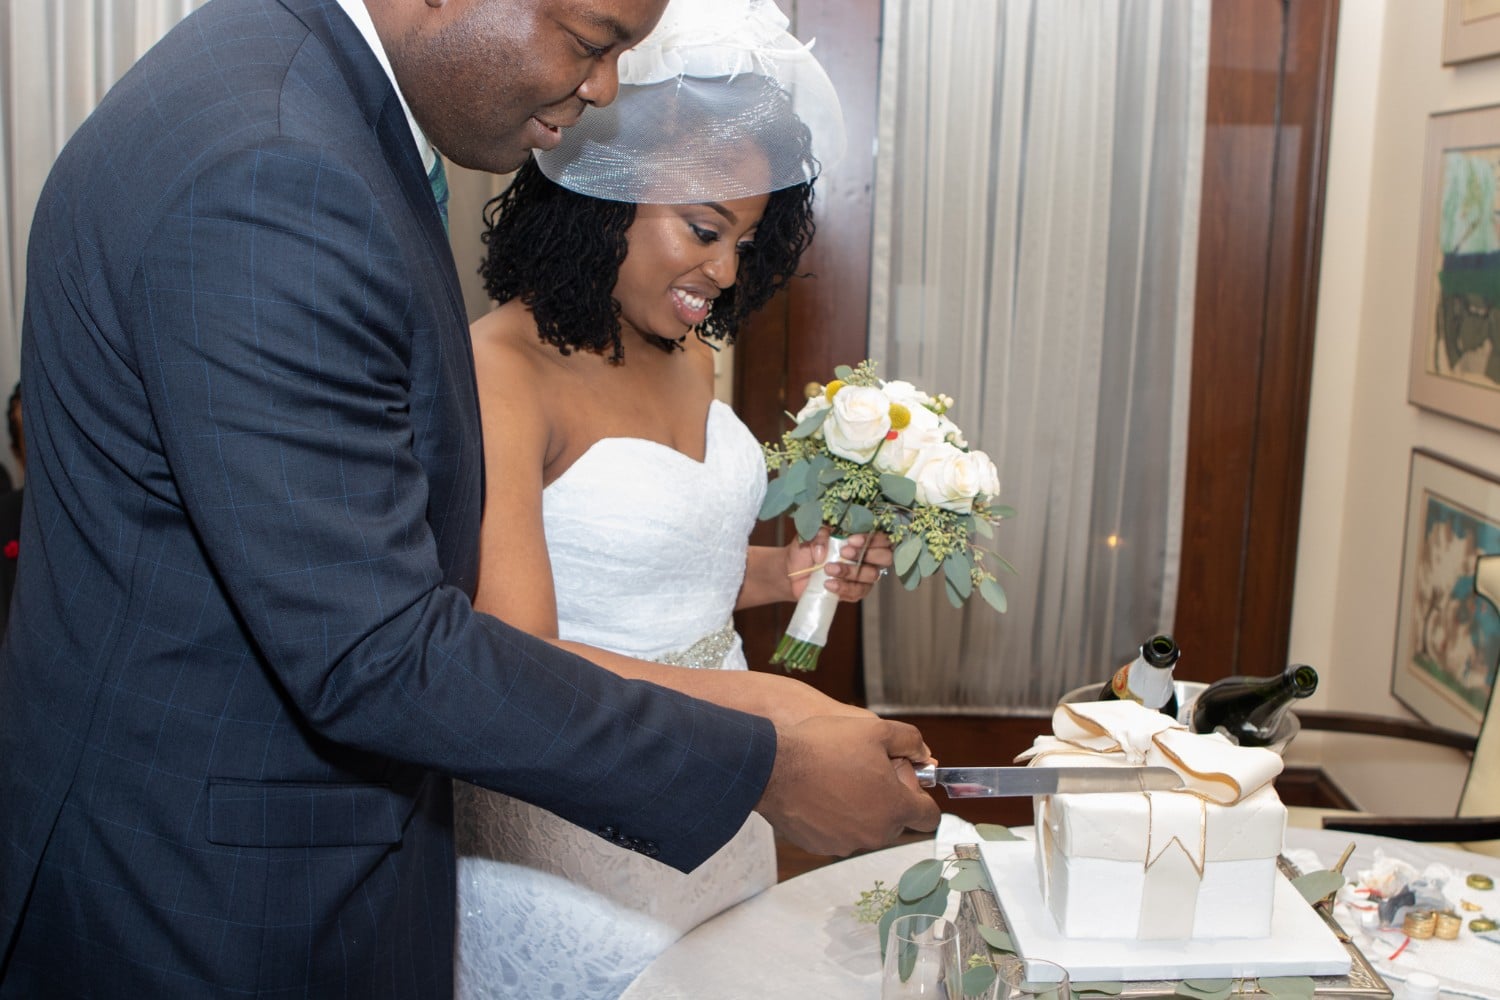 A newlywed couple cutting their cake at Stonehurst Place